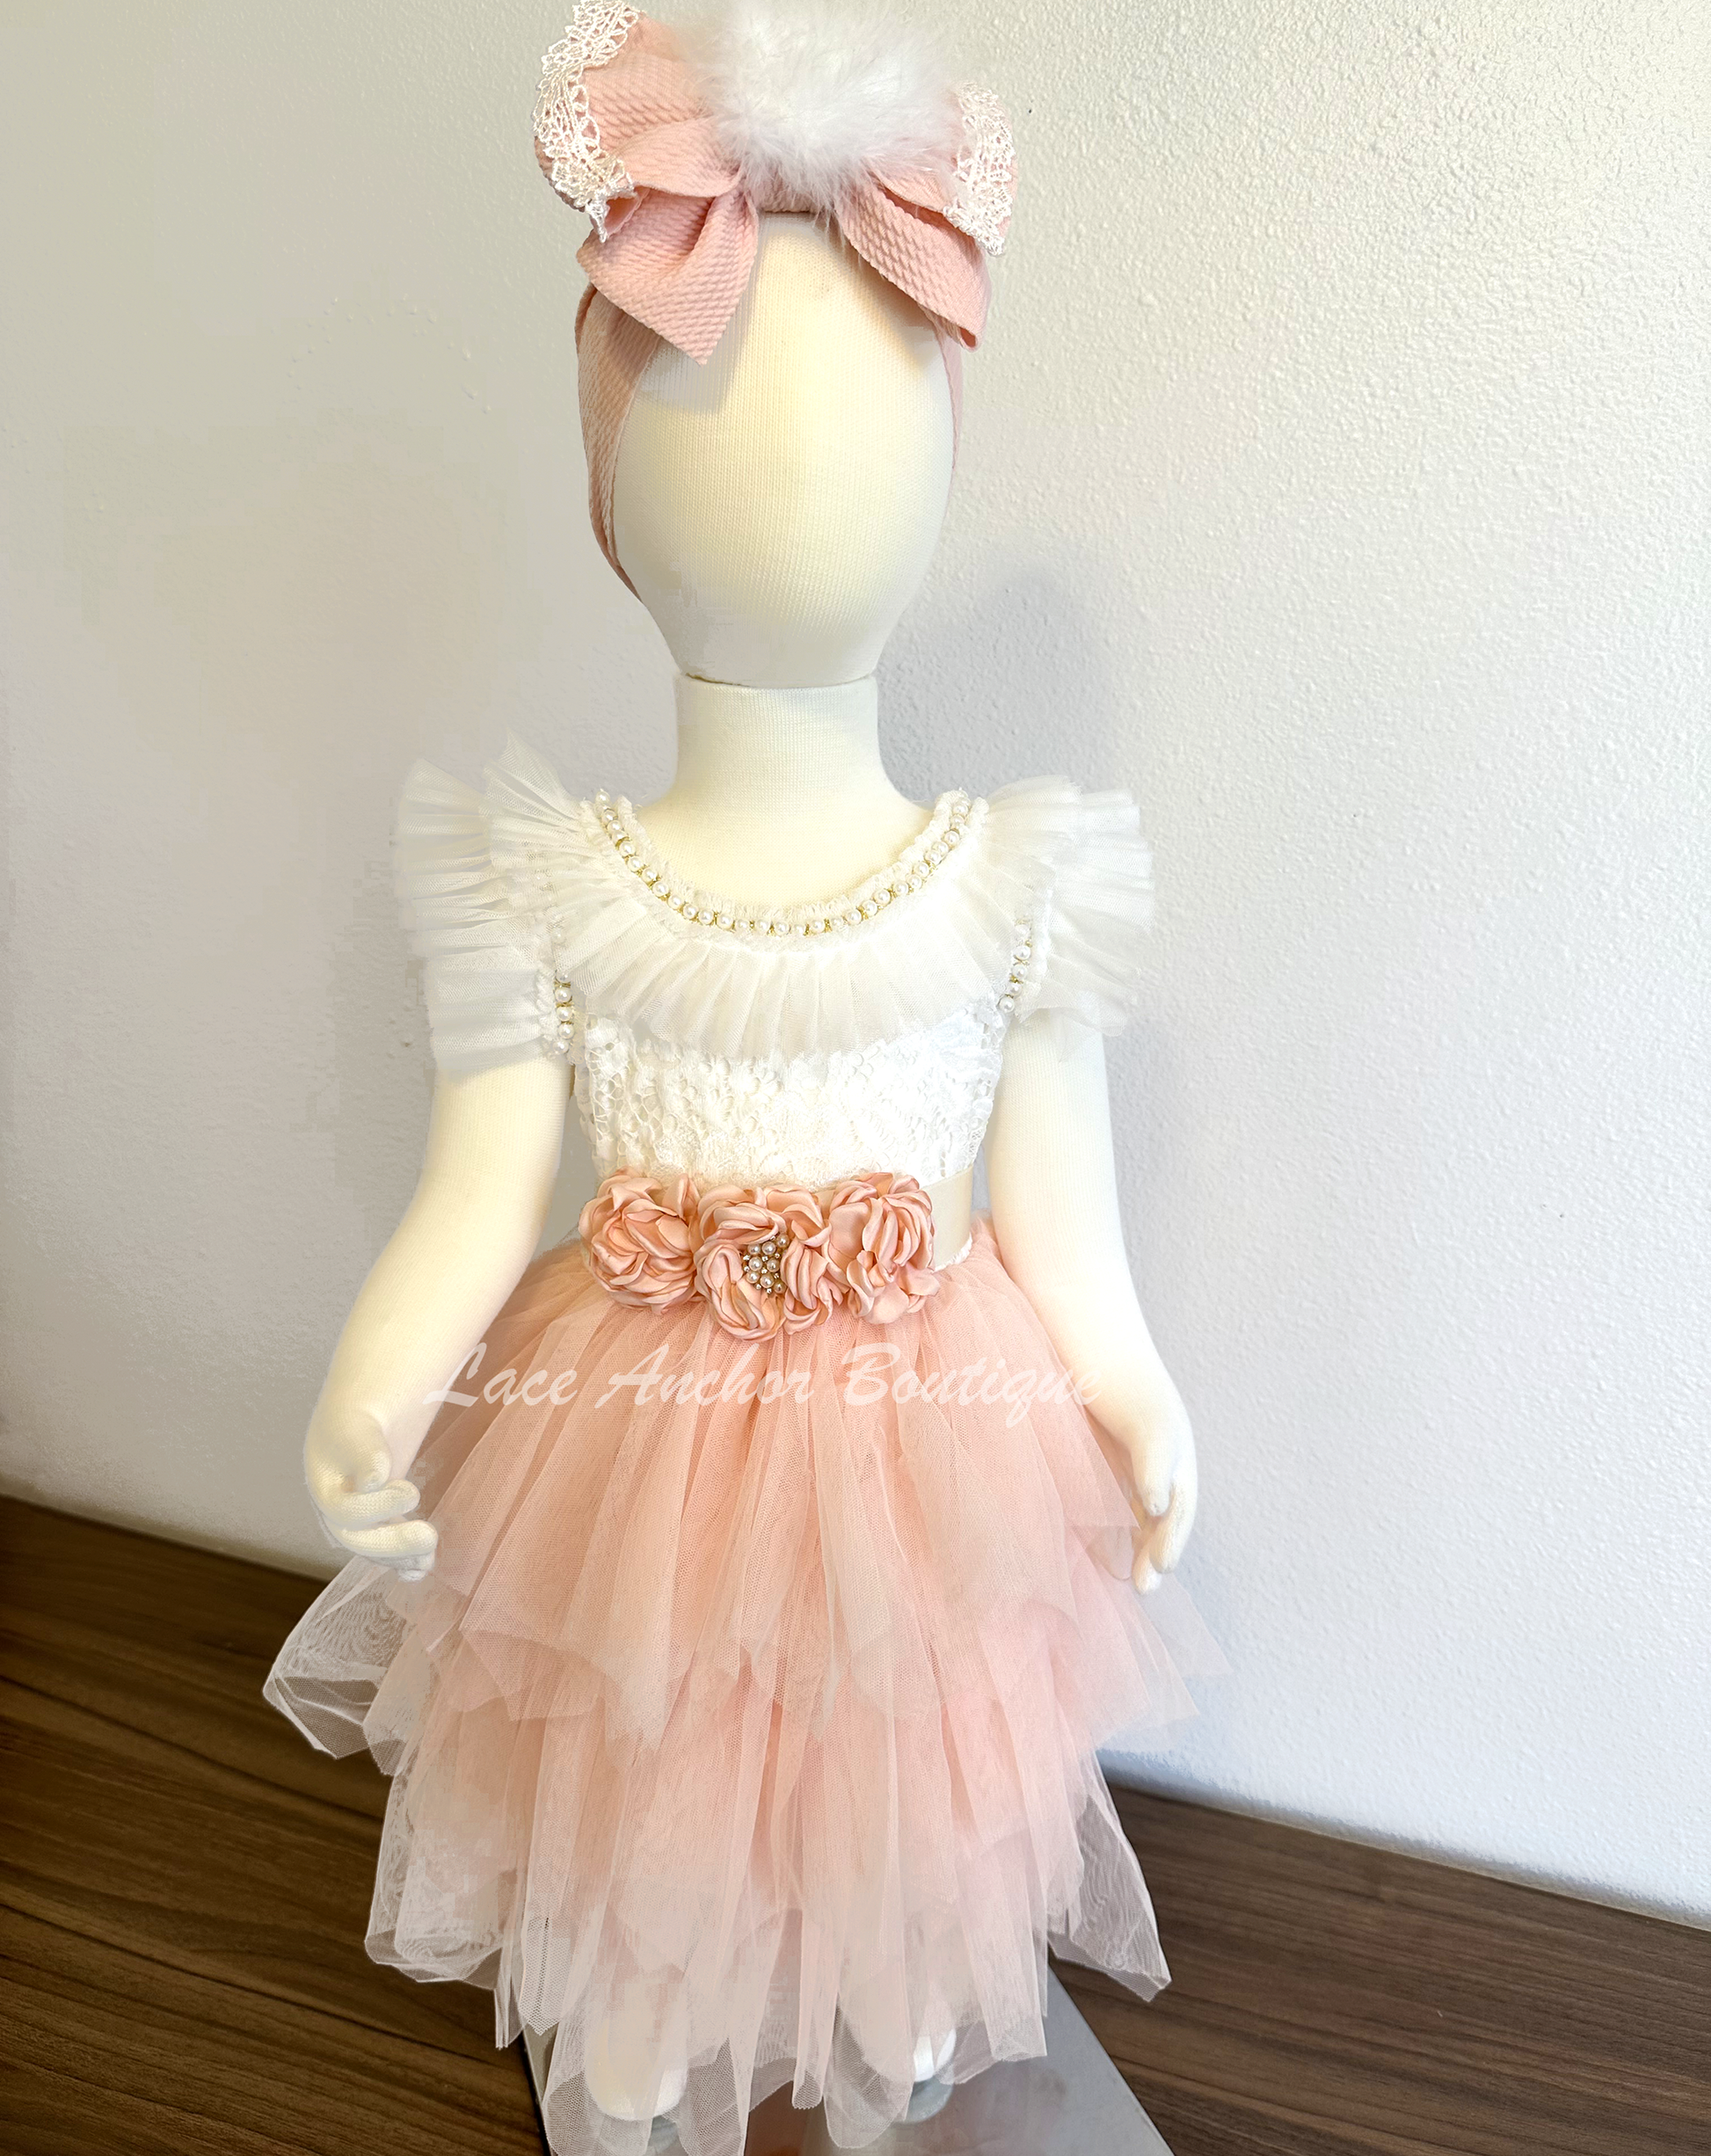 lace and tulle flower girls dress. white lace top with ruffled tulle sleeves and beaded pearl and rhinestone detailing with blush pink layered tulle skirt and silk flower tied sash.